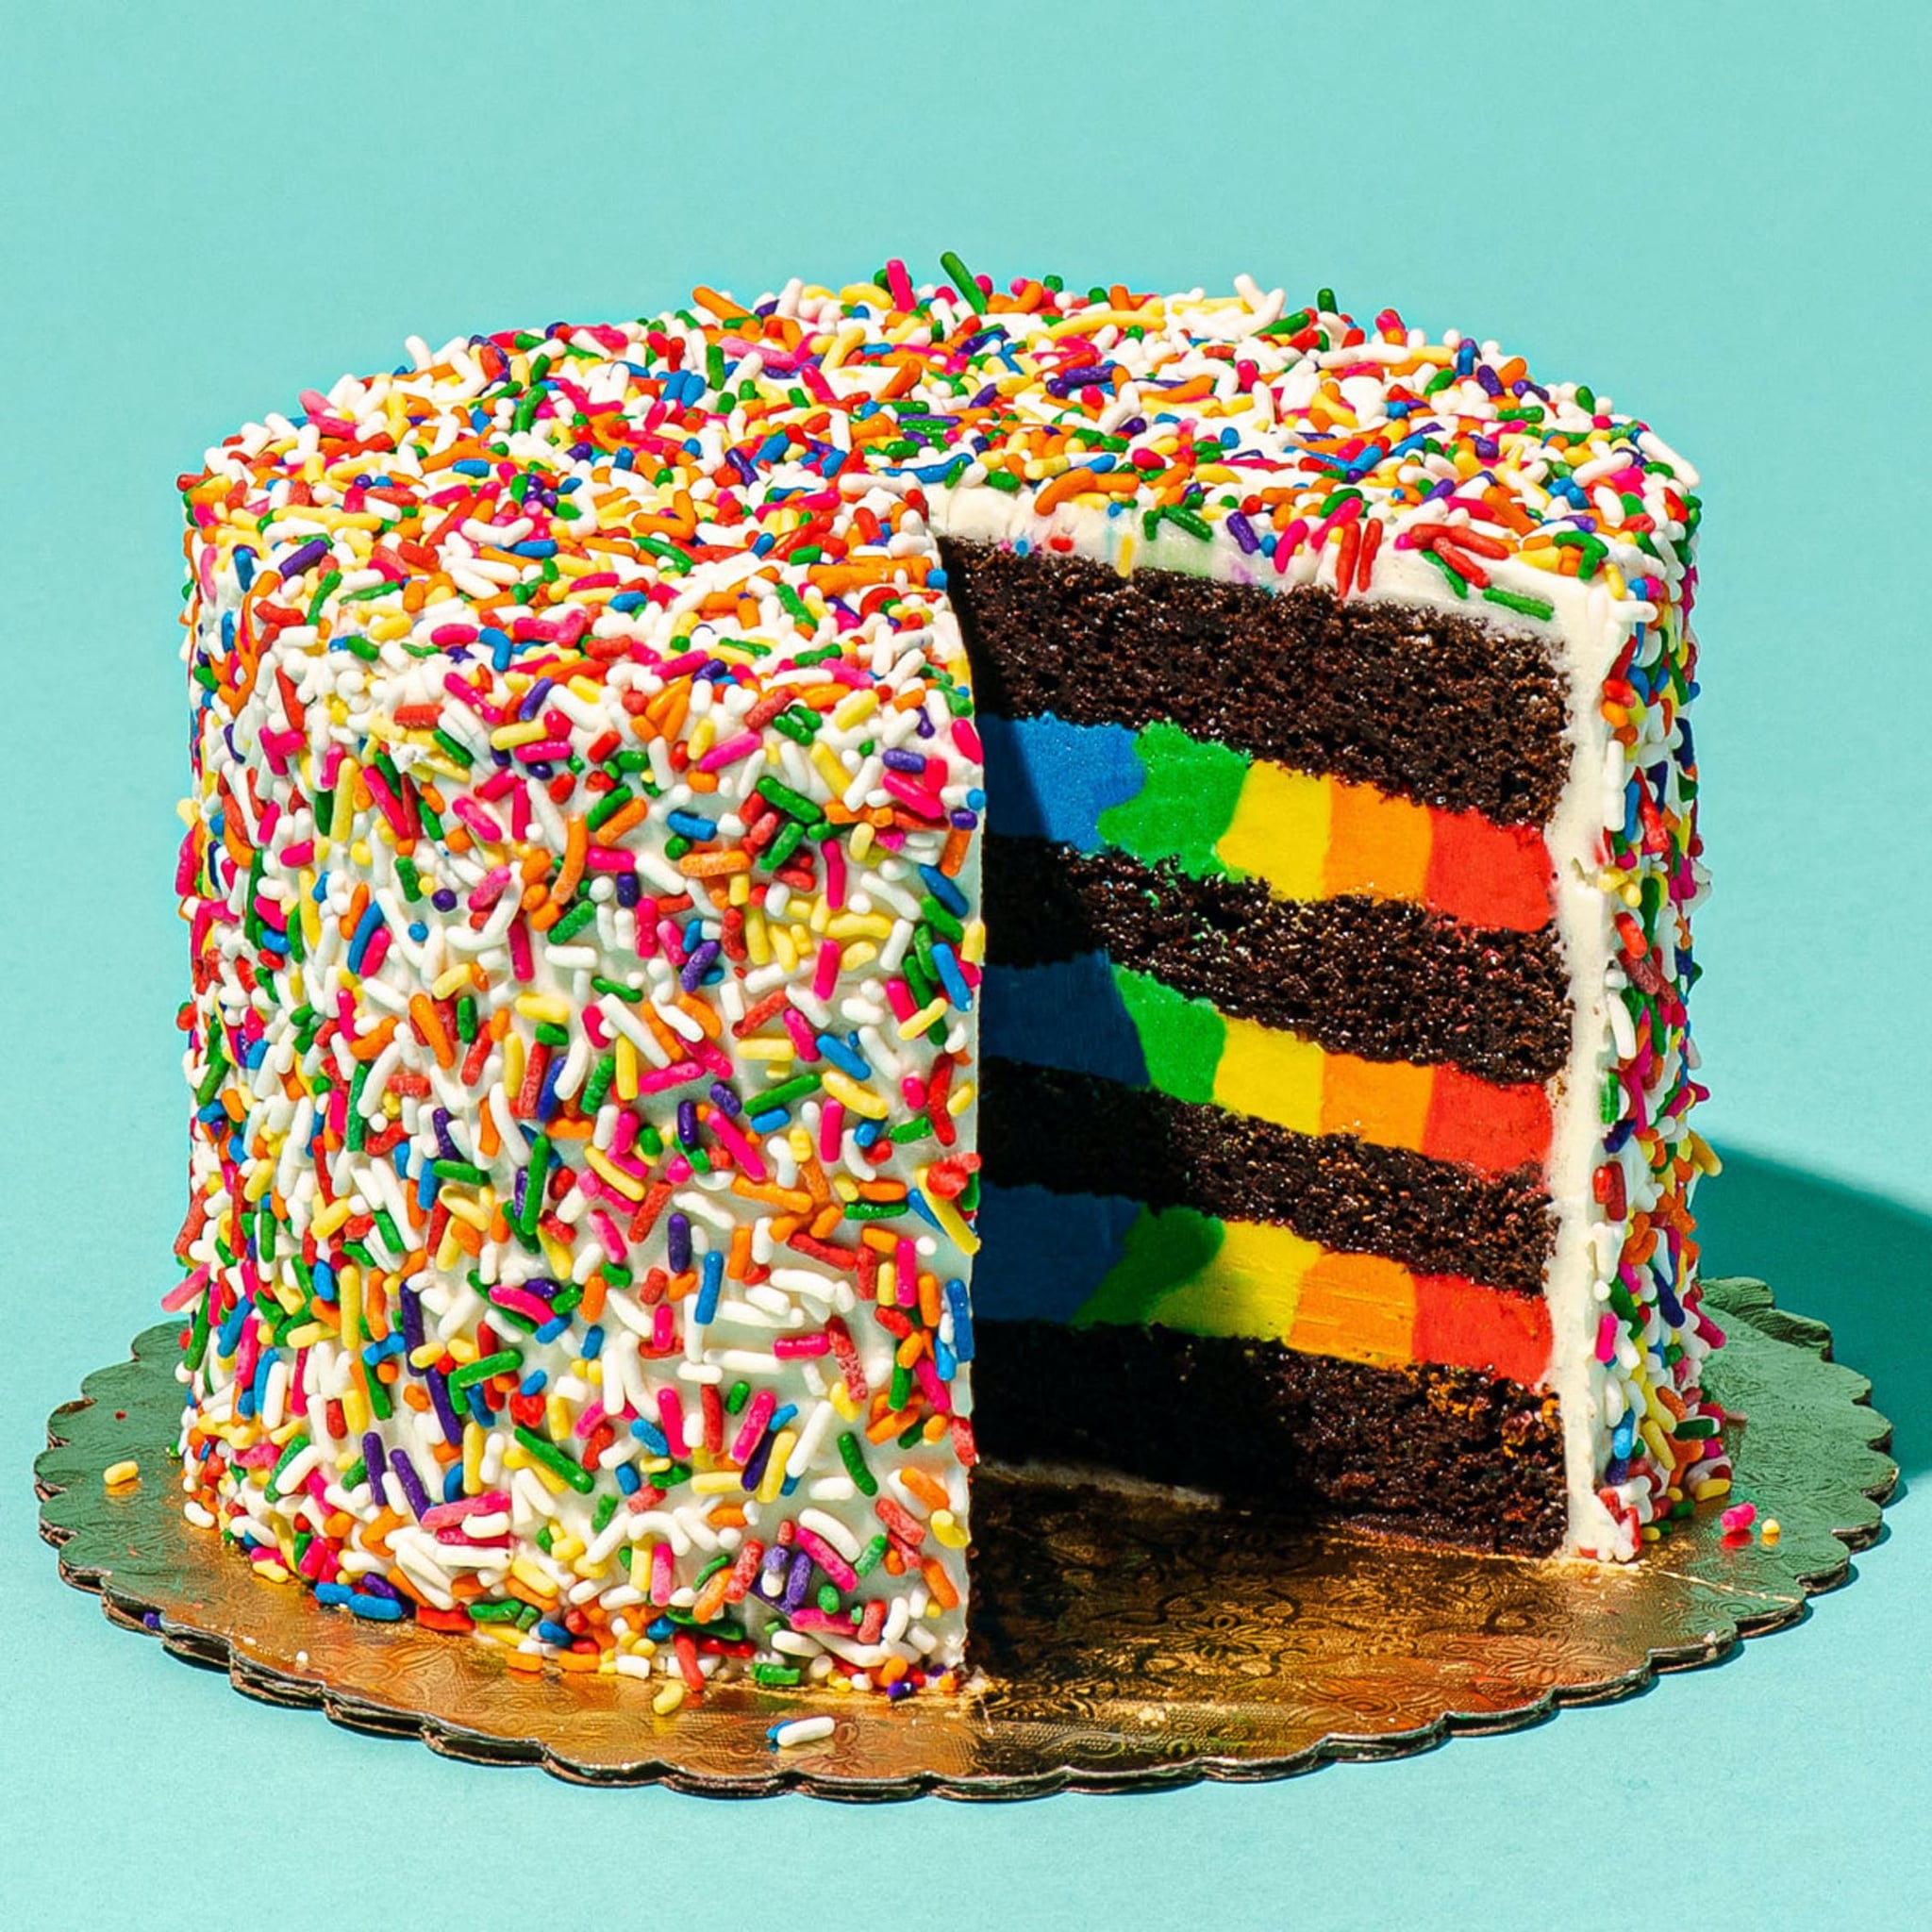 Secrets to Ordering Best Cake at Grocery Store, From a Cake Decorator